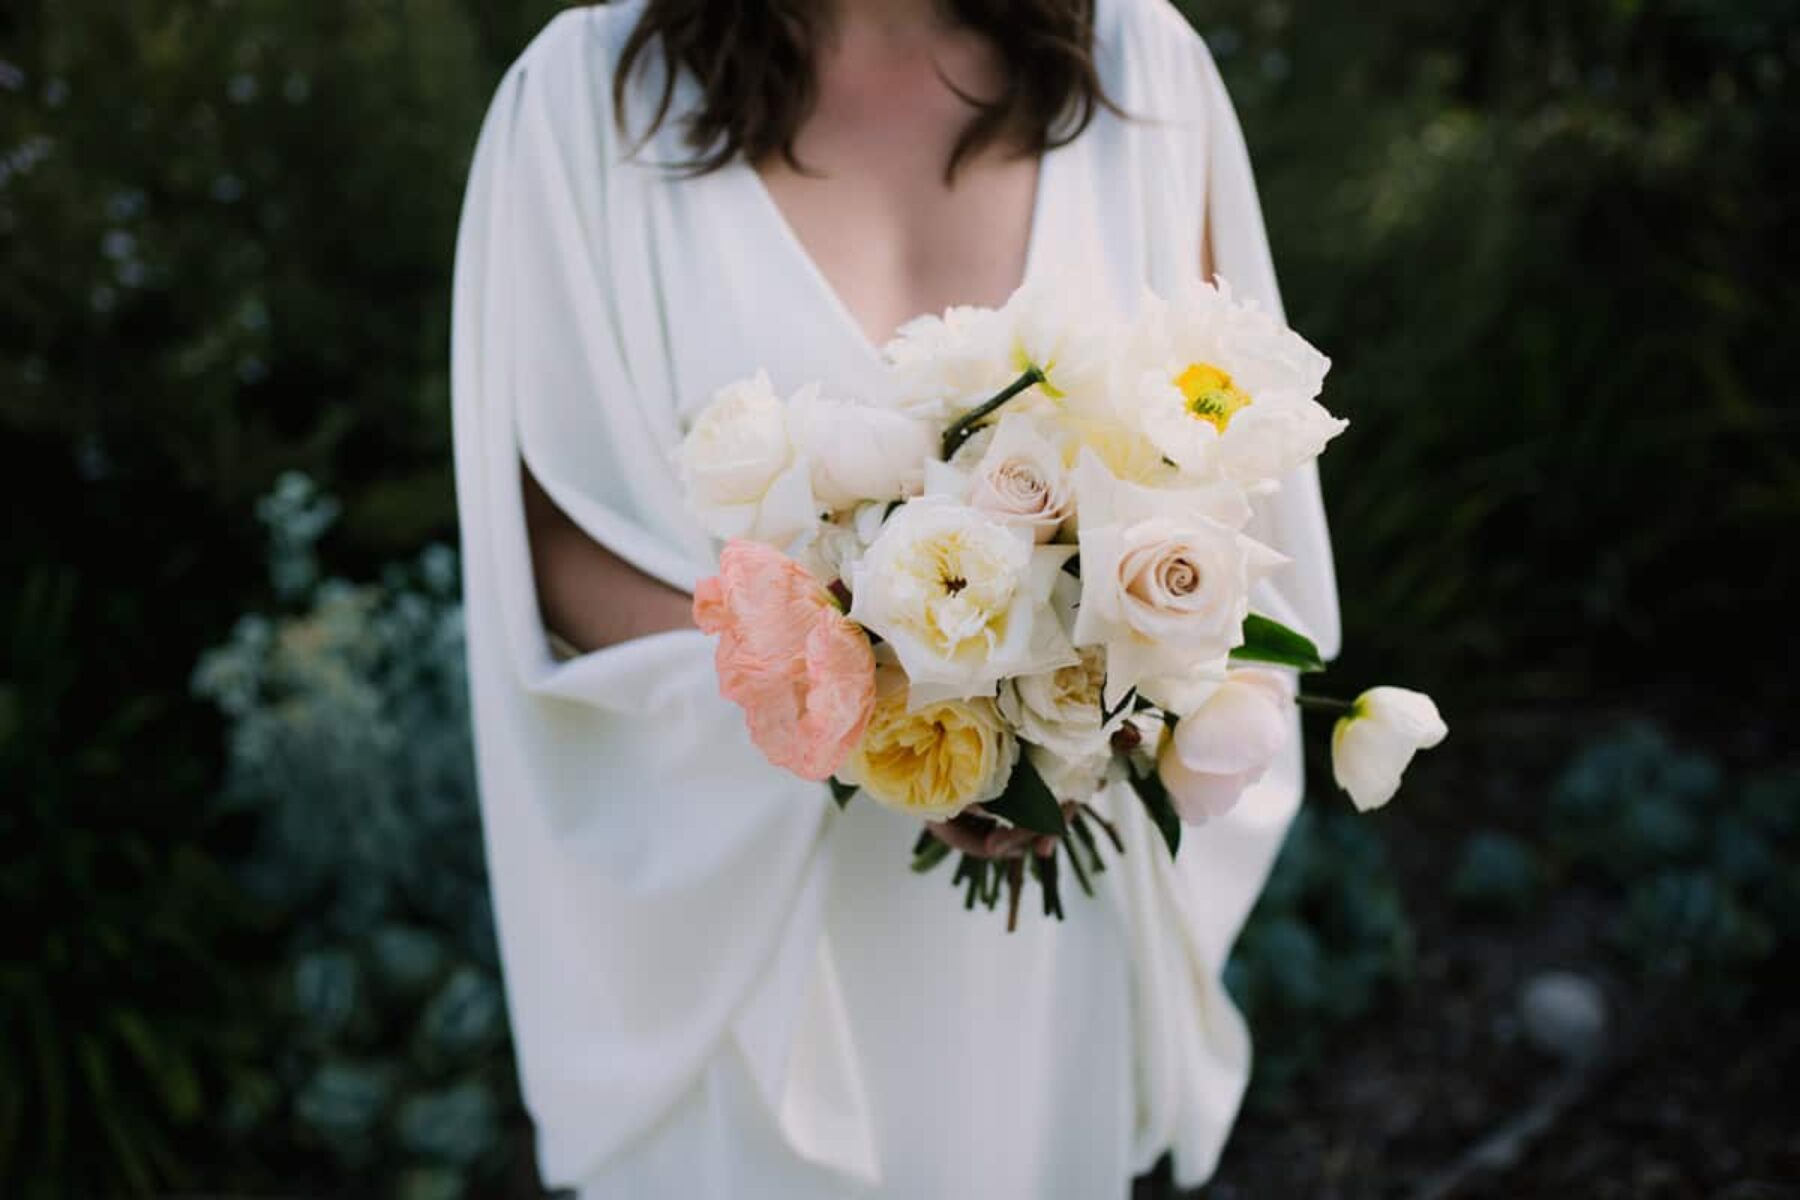 peach, white and yellow bouquet with poppies